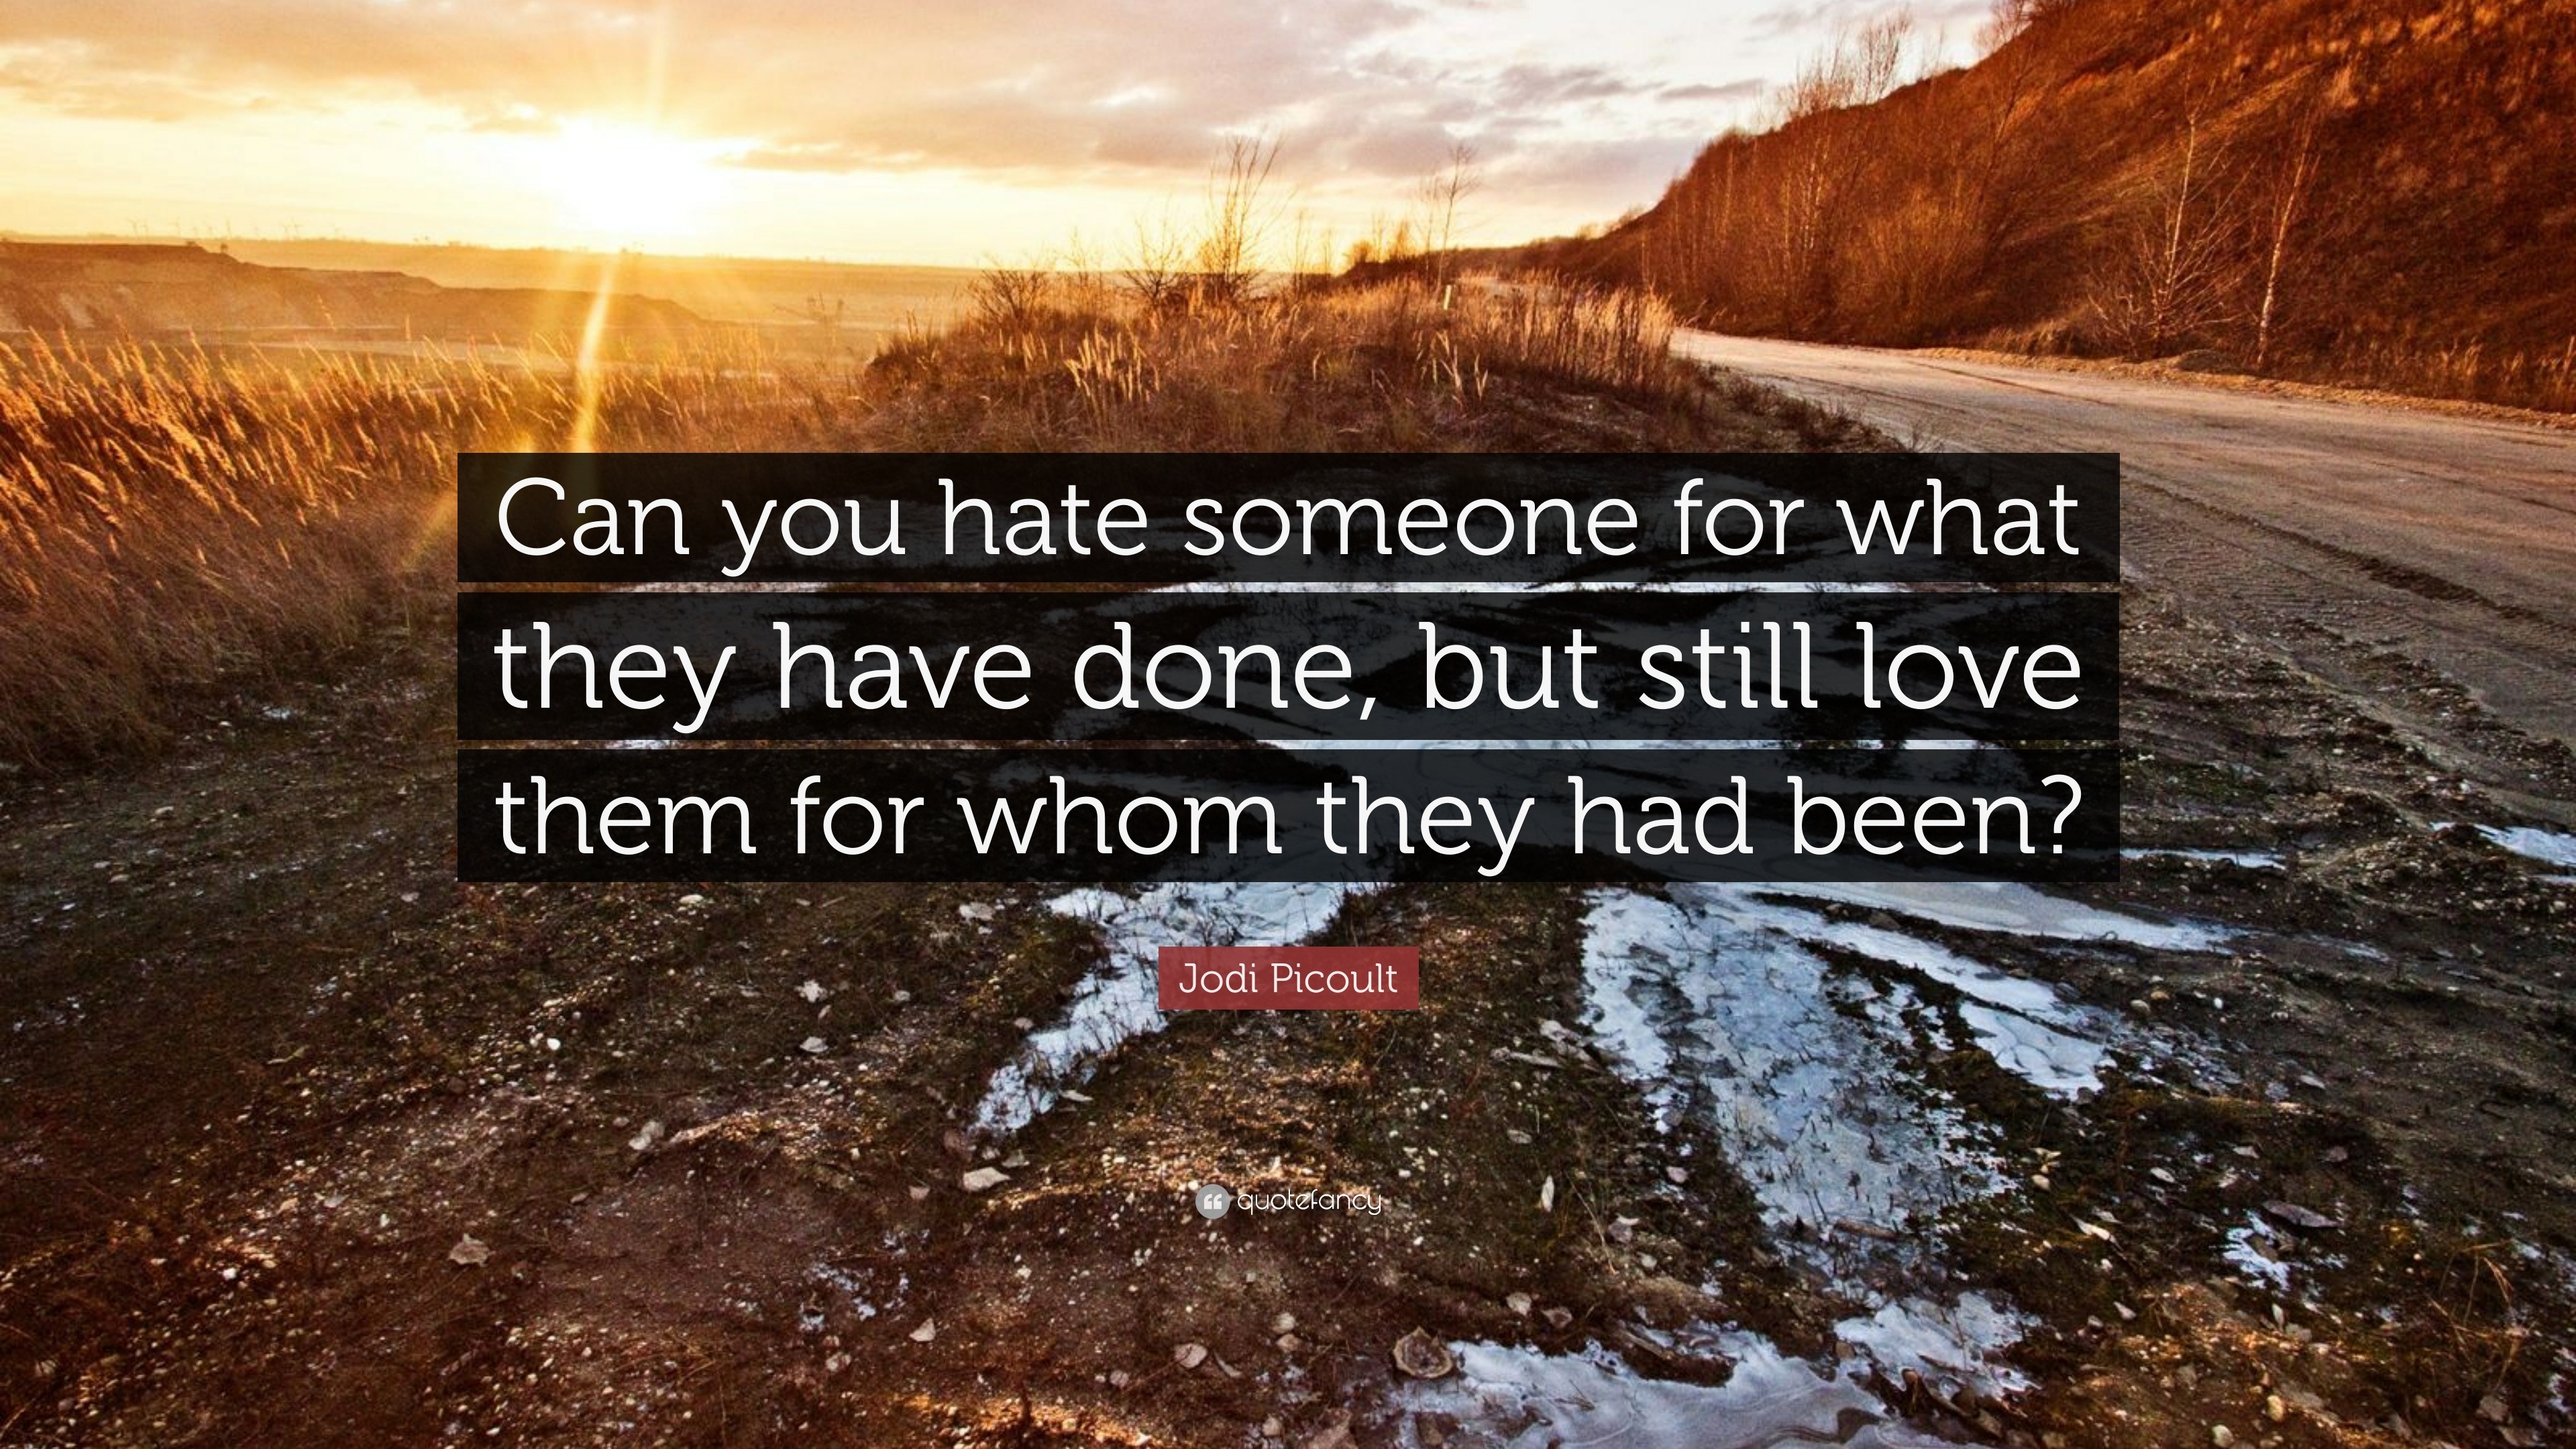 Jodi Picoult Quote “Can you hate someone for what they have done but